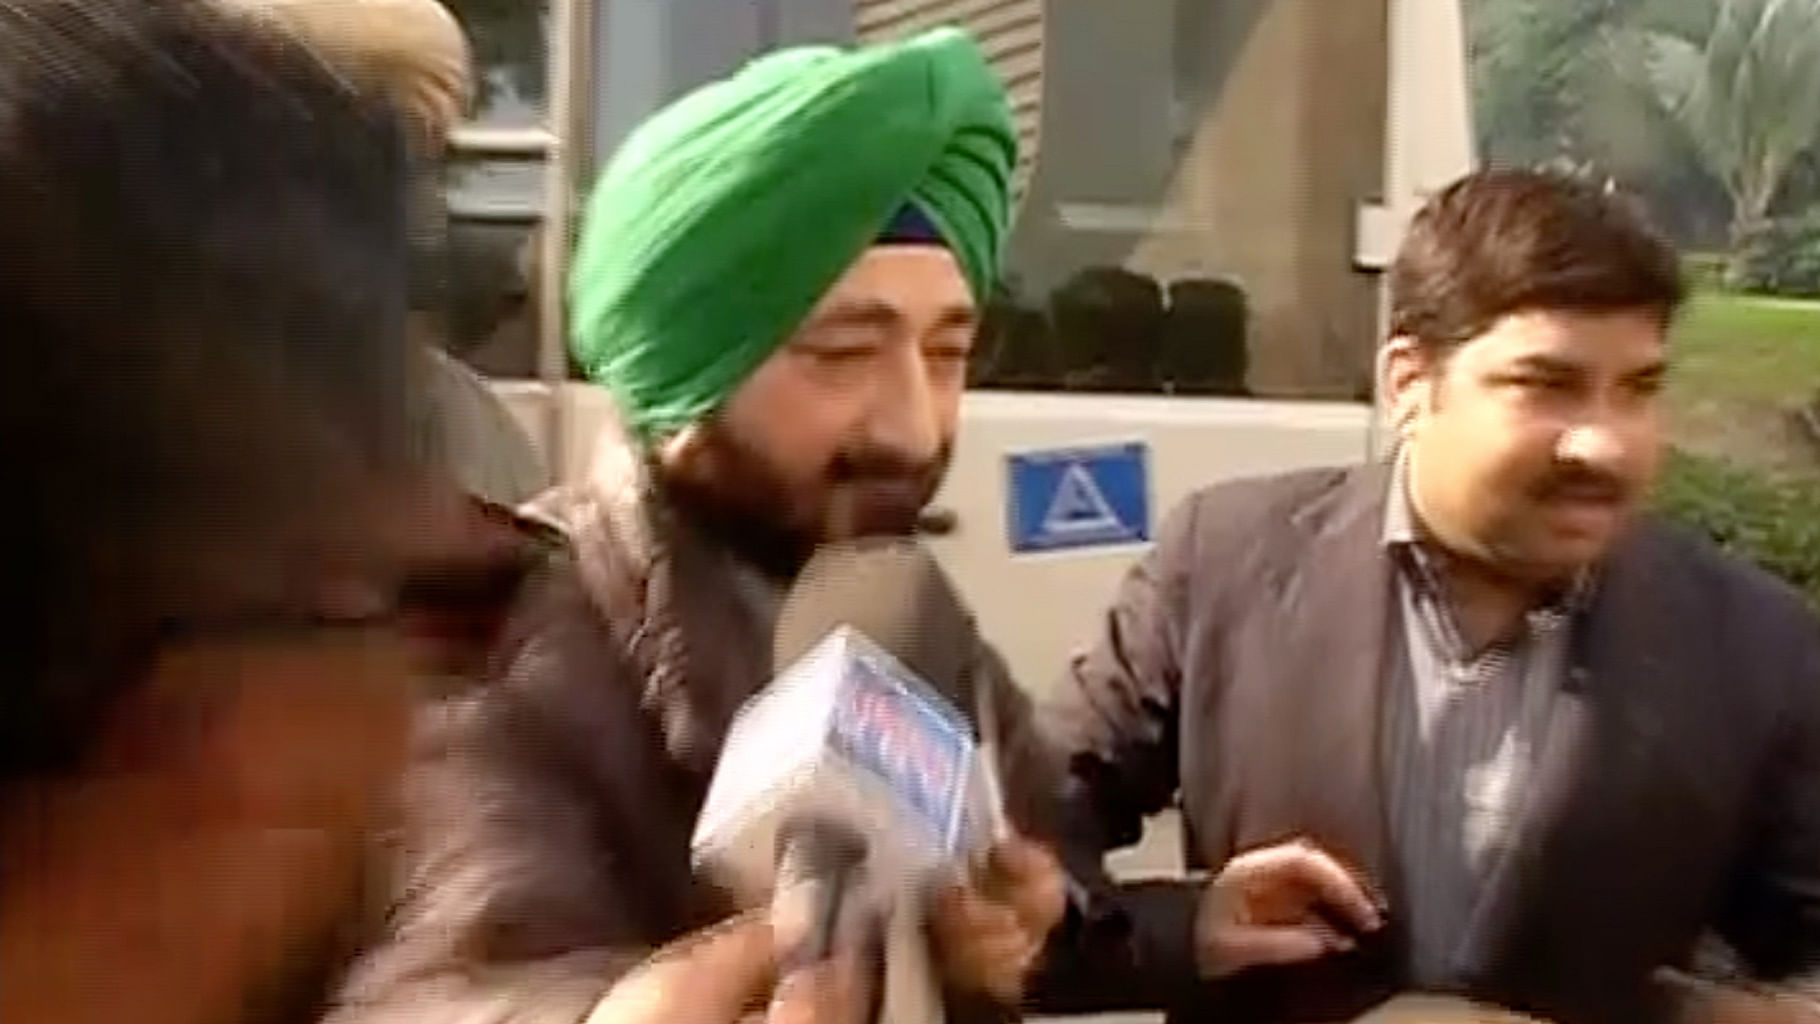 Gurdaspur SP Salwinder Singh was questioned as part of the investigation into the attack on the Pathankot air base . (Photo: ANI screengrab)